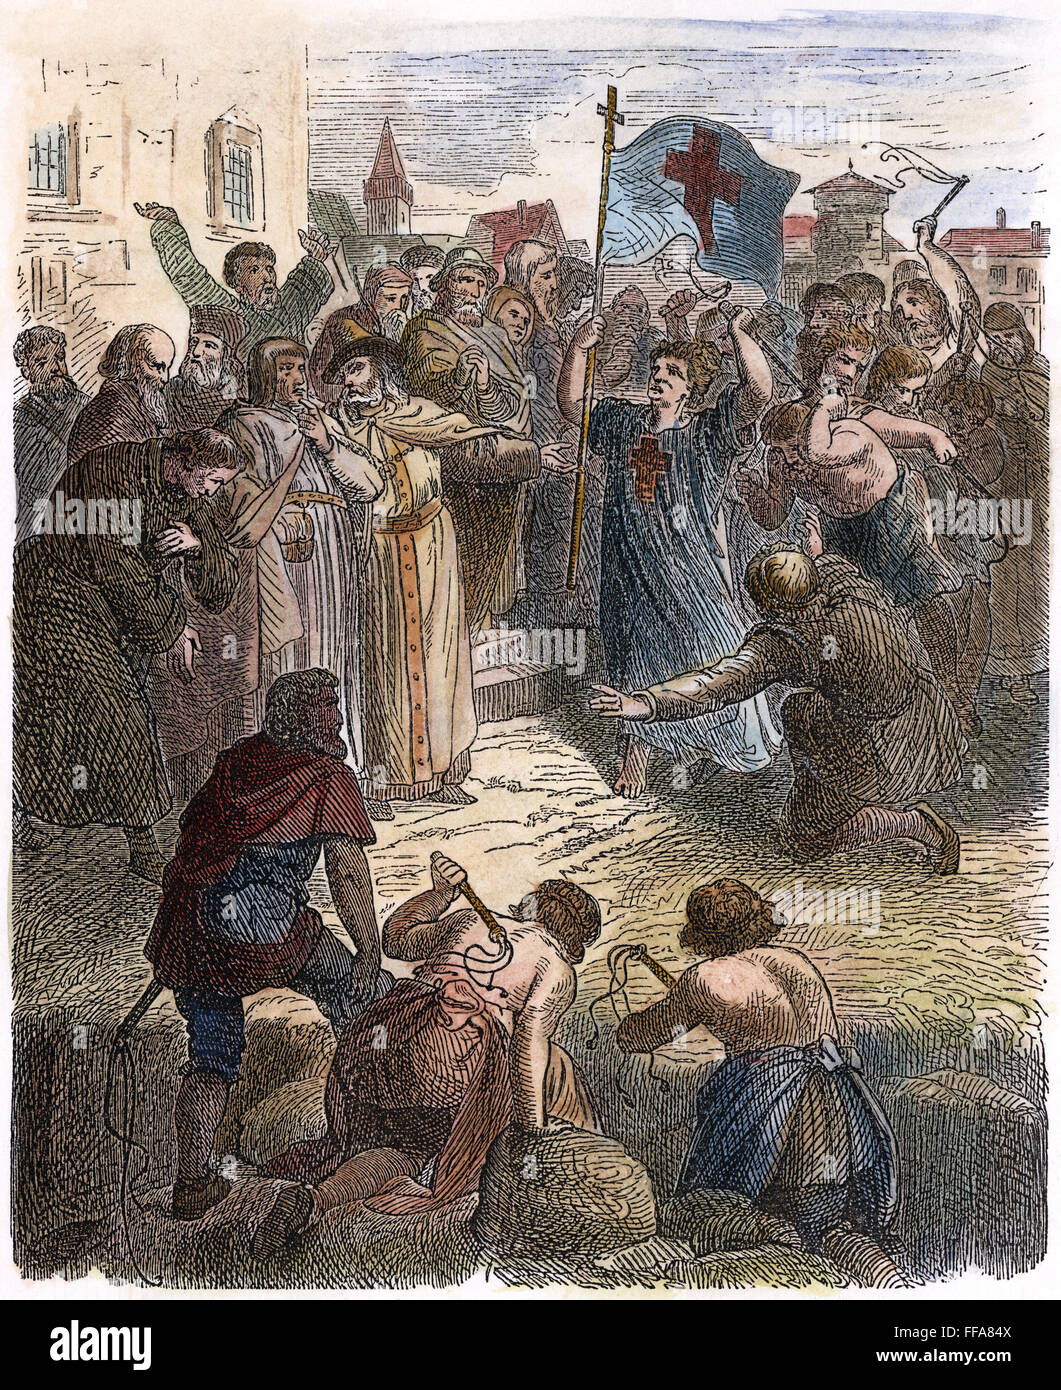 FLAGELLANTS: MIDDLE AGES. /nLine engraving, German, 19th century. Stock Photo